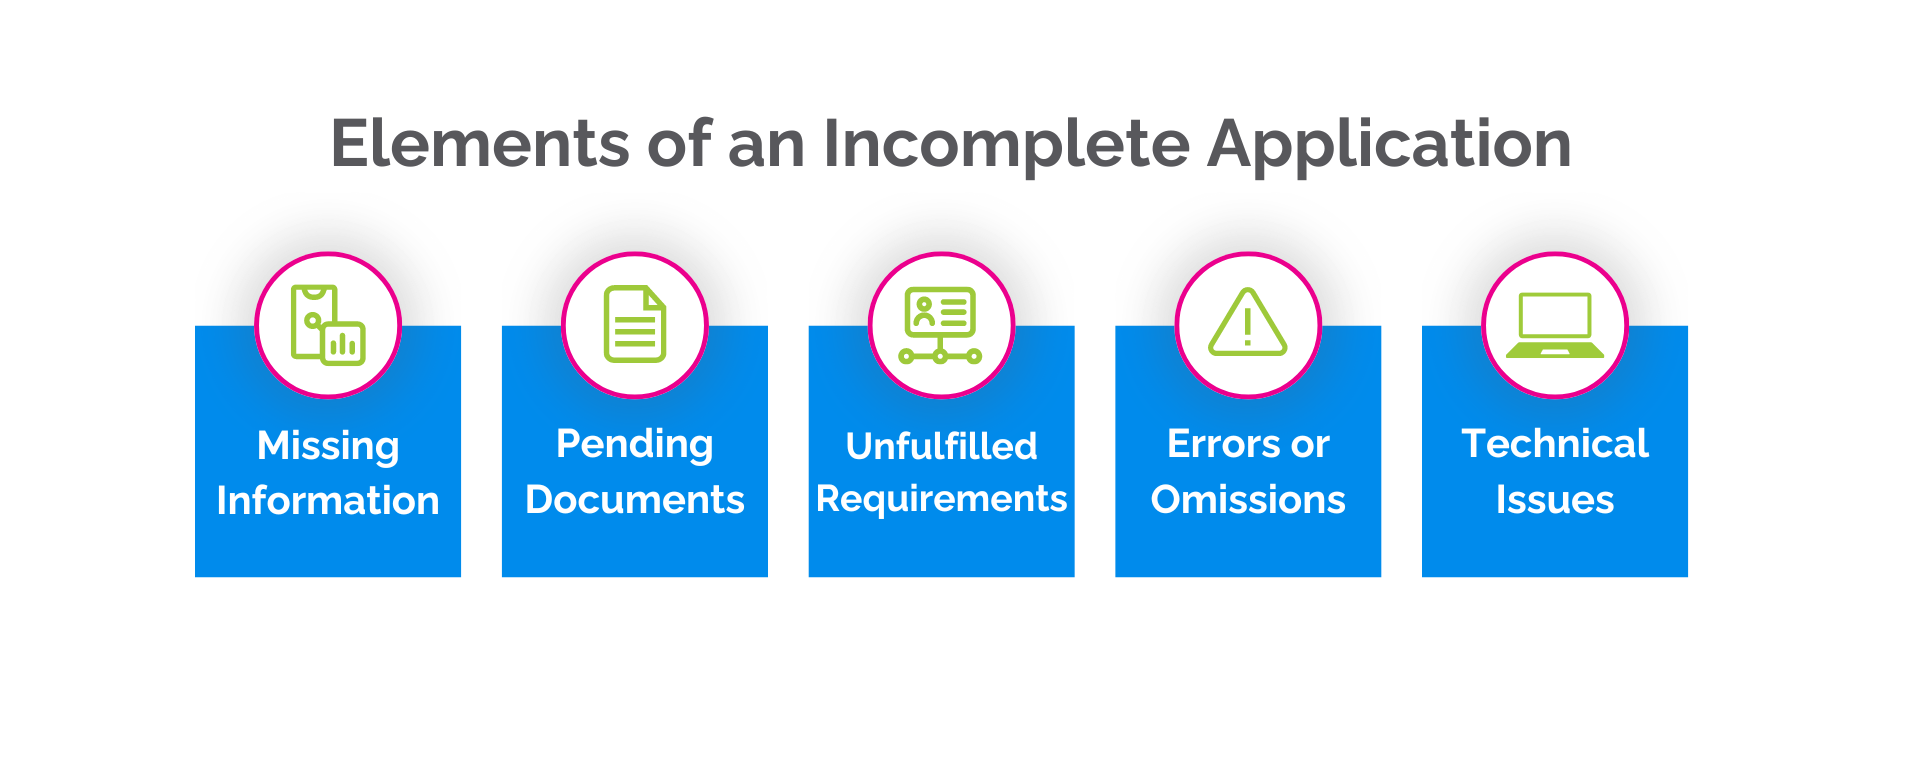 elements of an incomplete application email infographic 